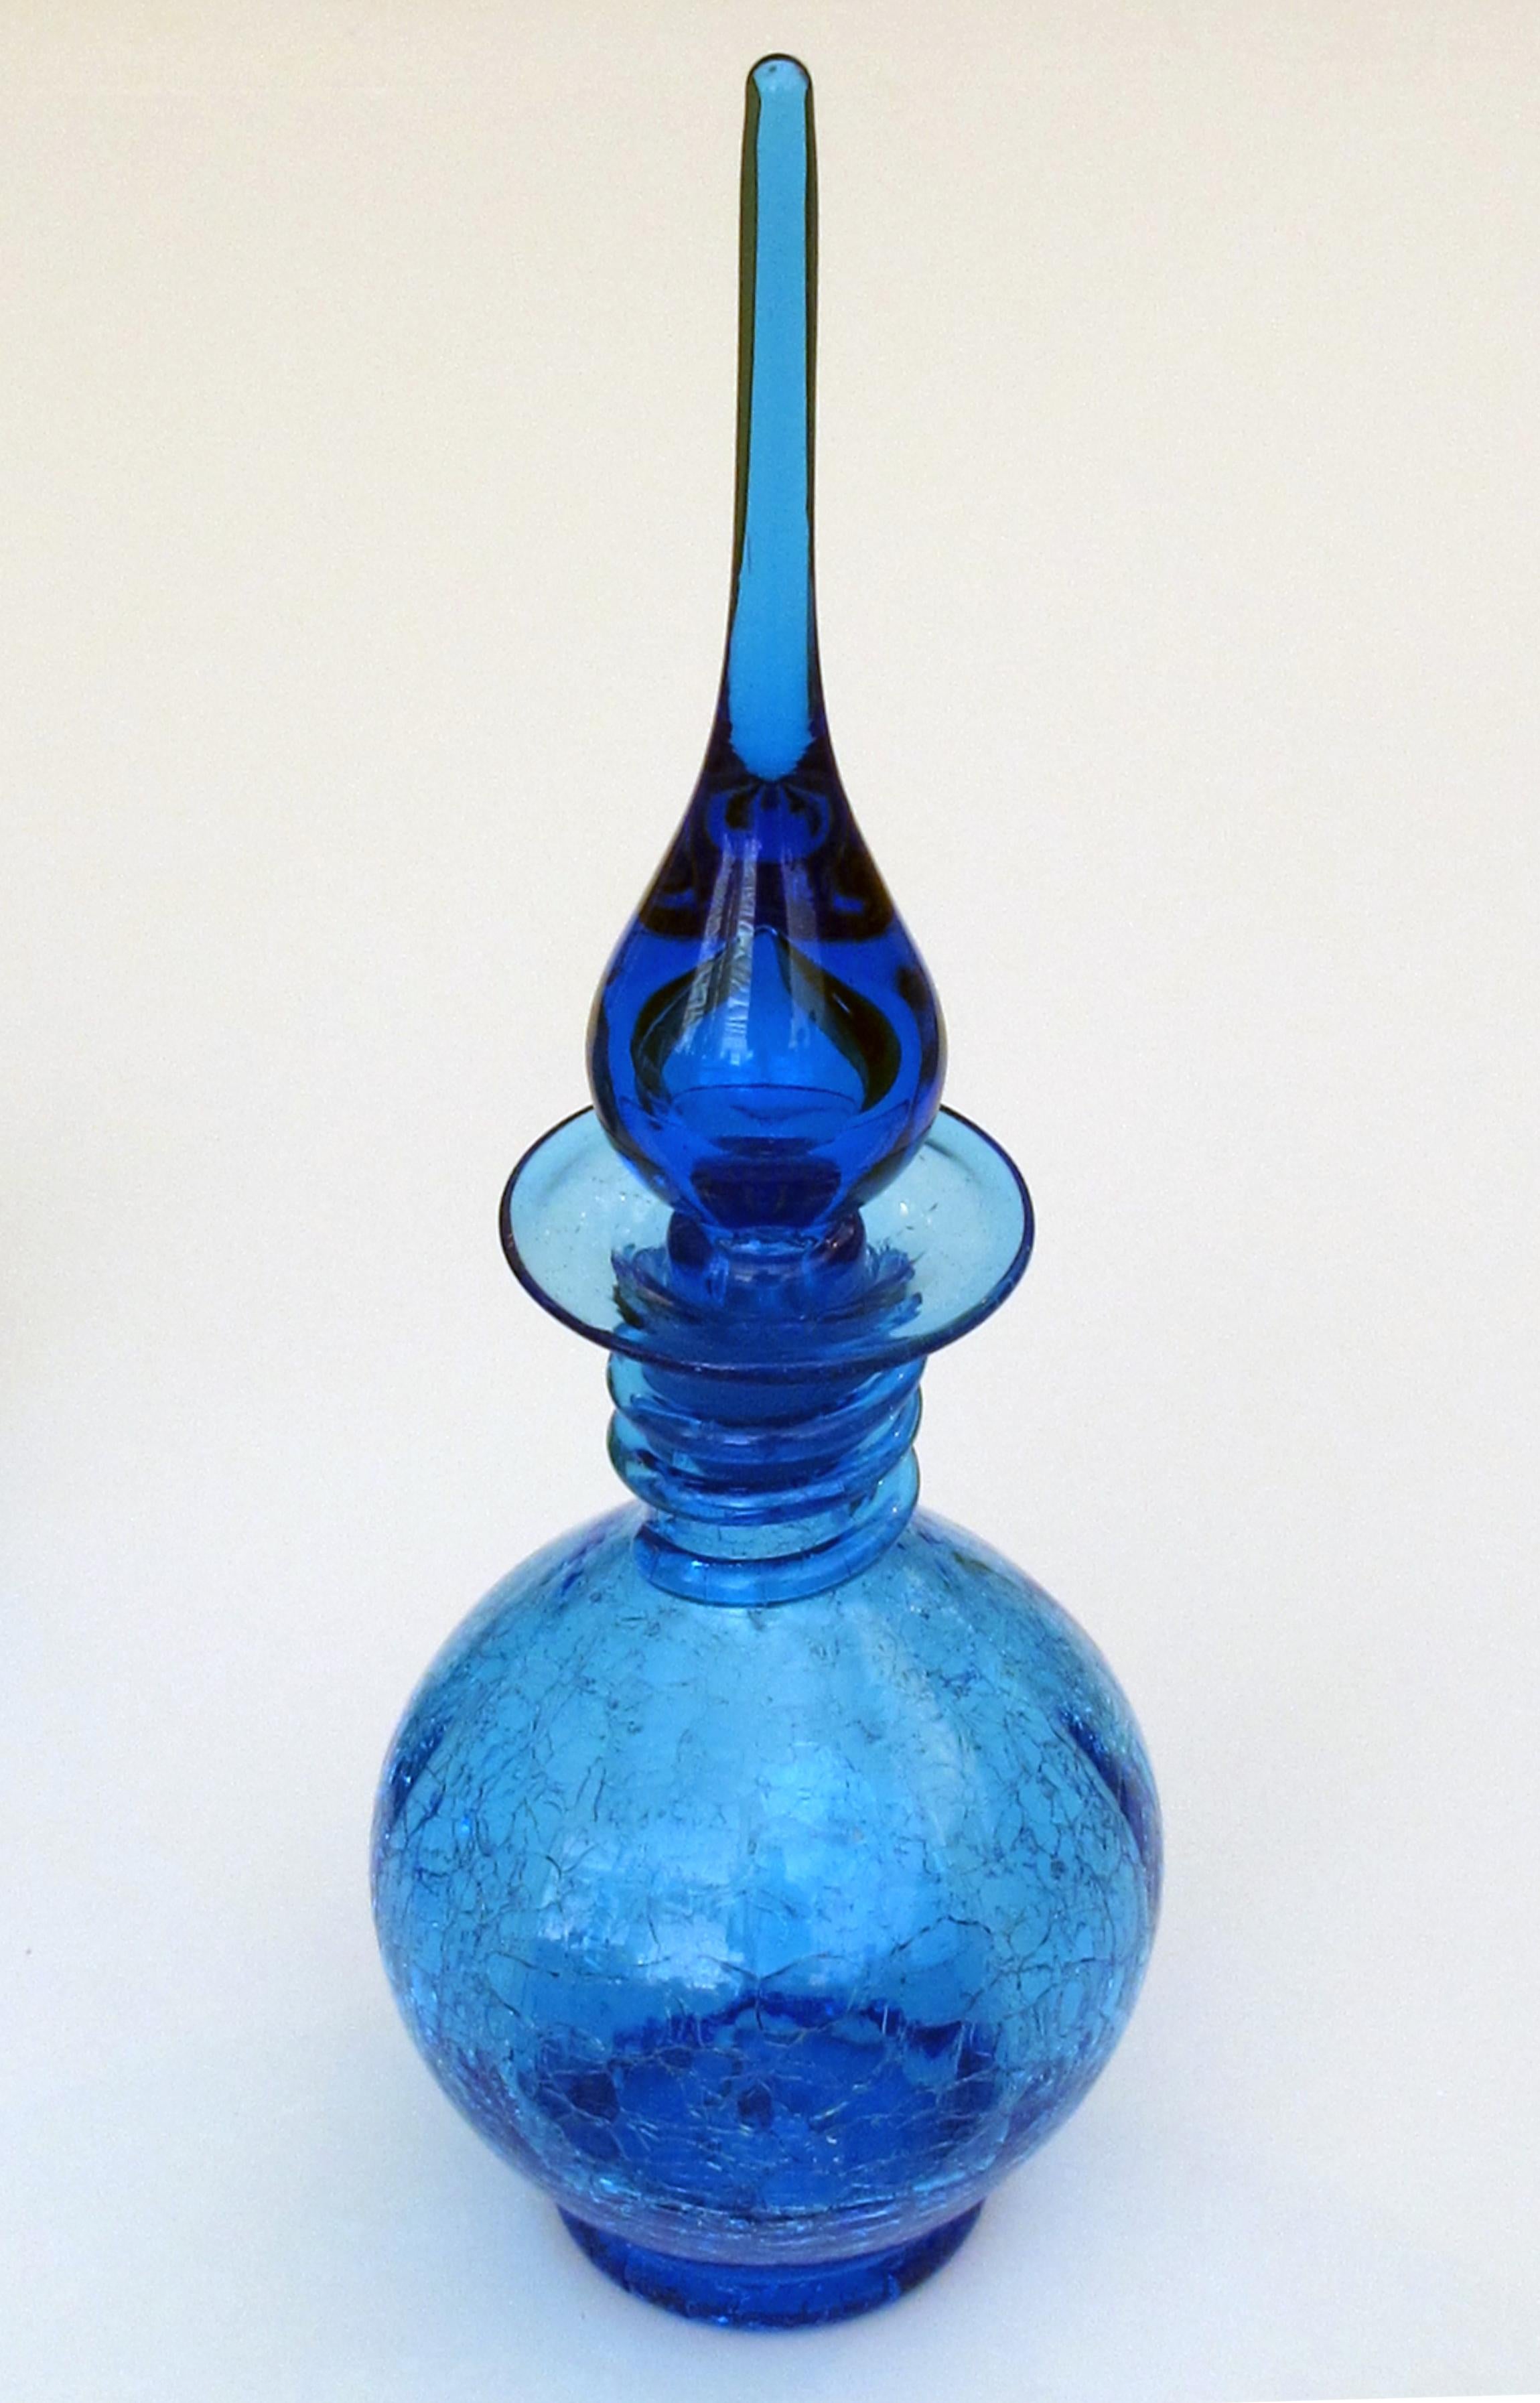 A rare set of 3 American 1960's art glass decanters by Joel Myers for Blenko Glassworks; each with onion-form stopper above bottle-form bodies in colors of blue and chartreuse; 2 decanters in iconic crackle glass; Joel Myers served as Director of